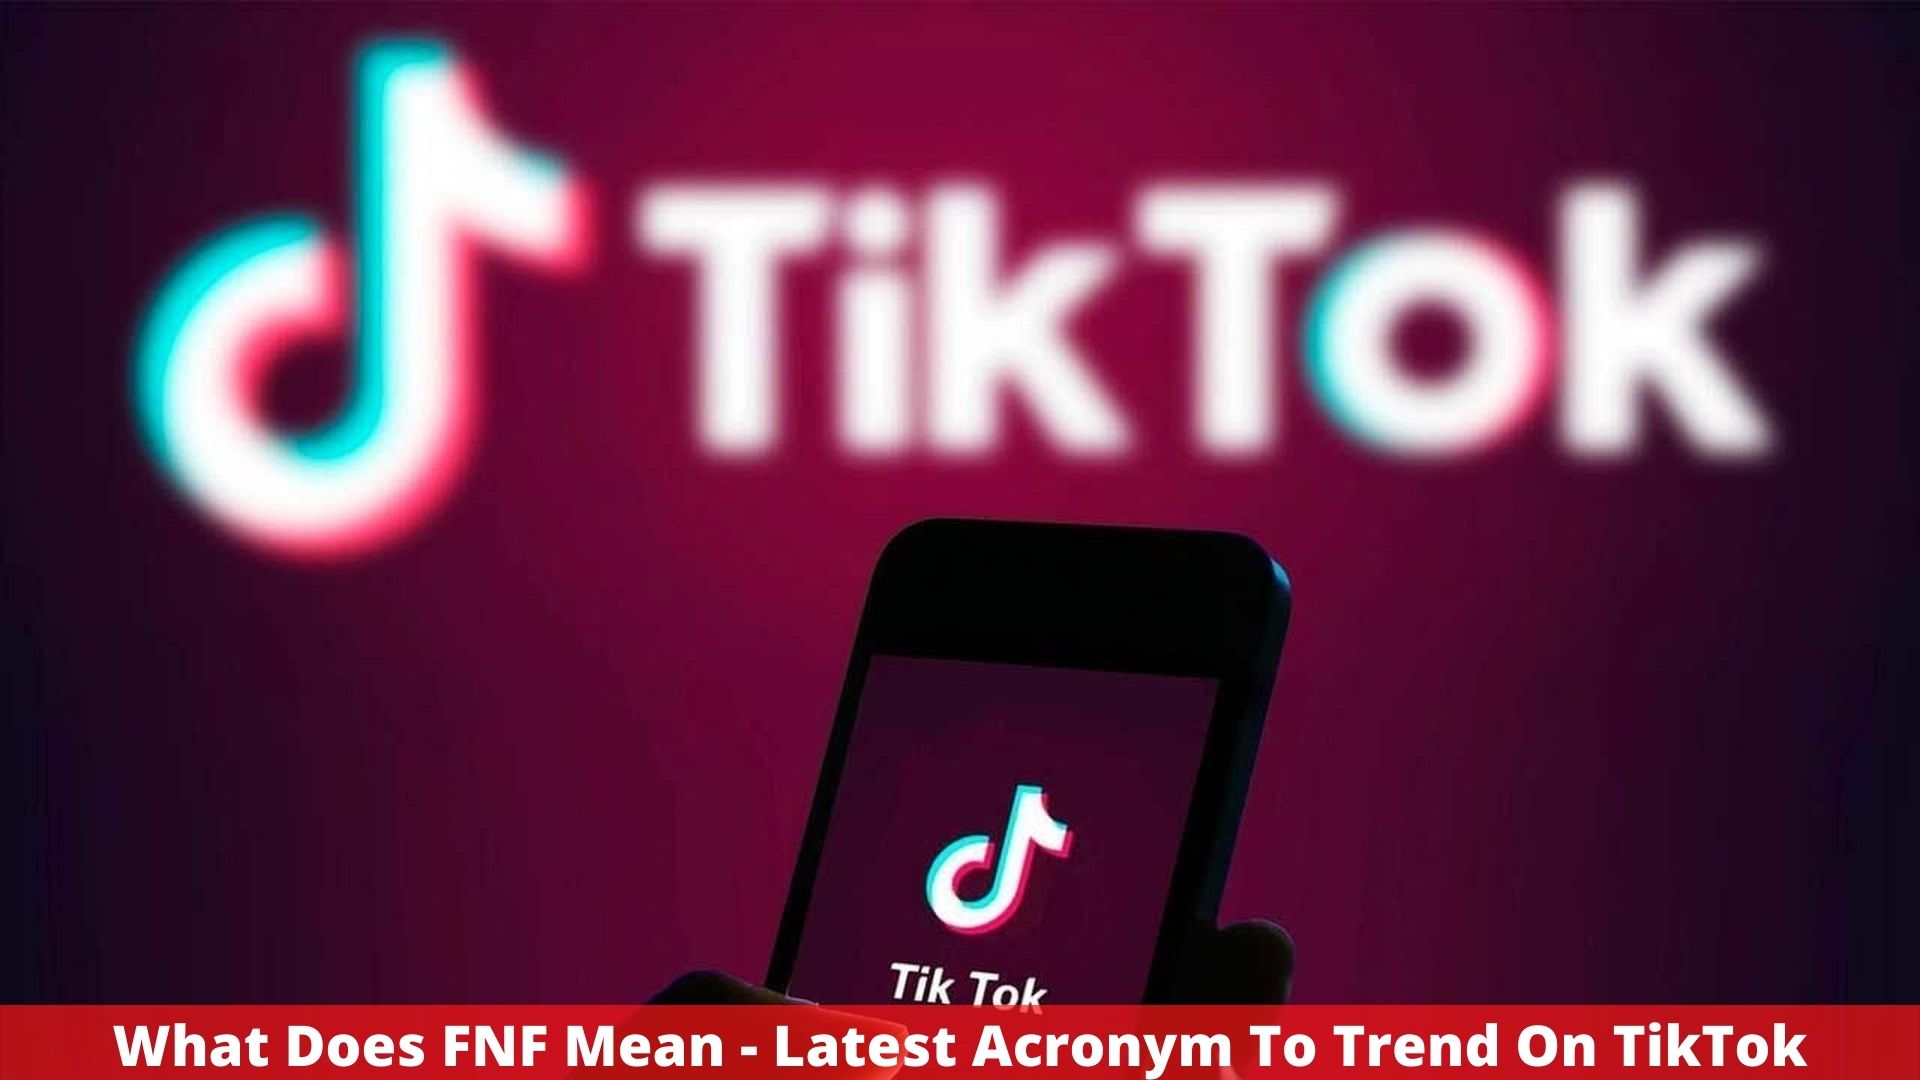 What Does FNF Mean - Latest Acronym To Trend On TikTok